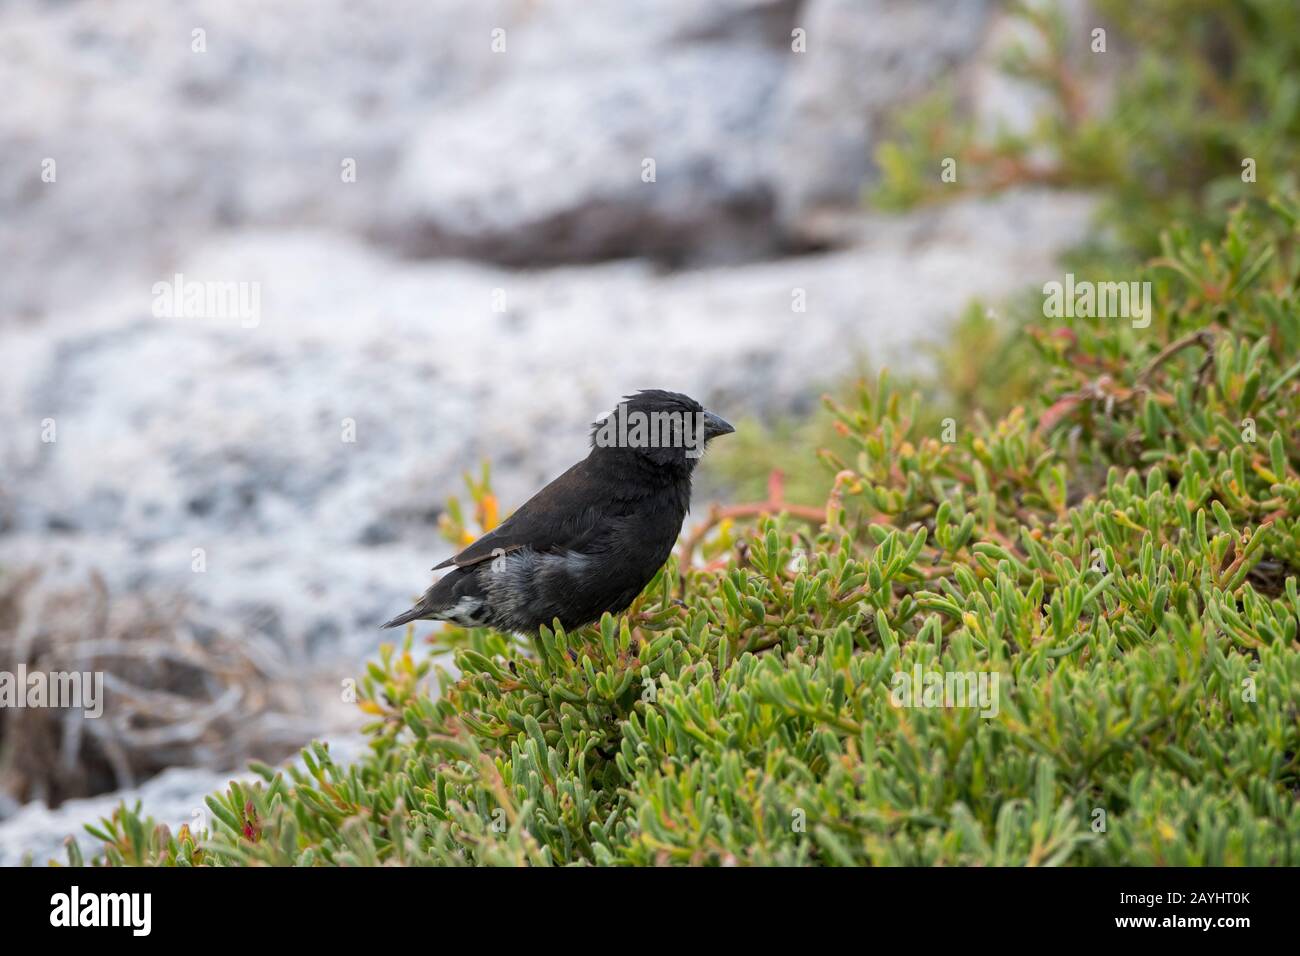 A Medium ground finch (Geospiza fortis) on South Plaza Island in the Galapagos Islands, Ecuador. Stock Photo